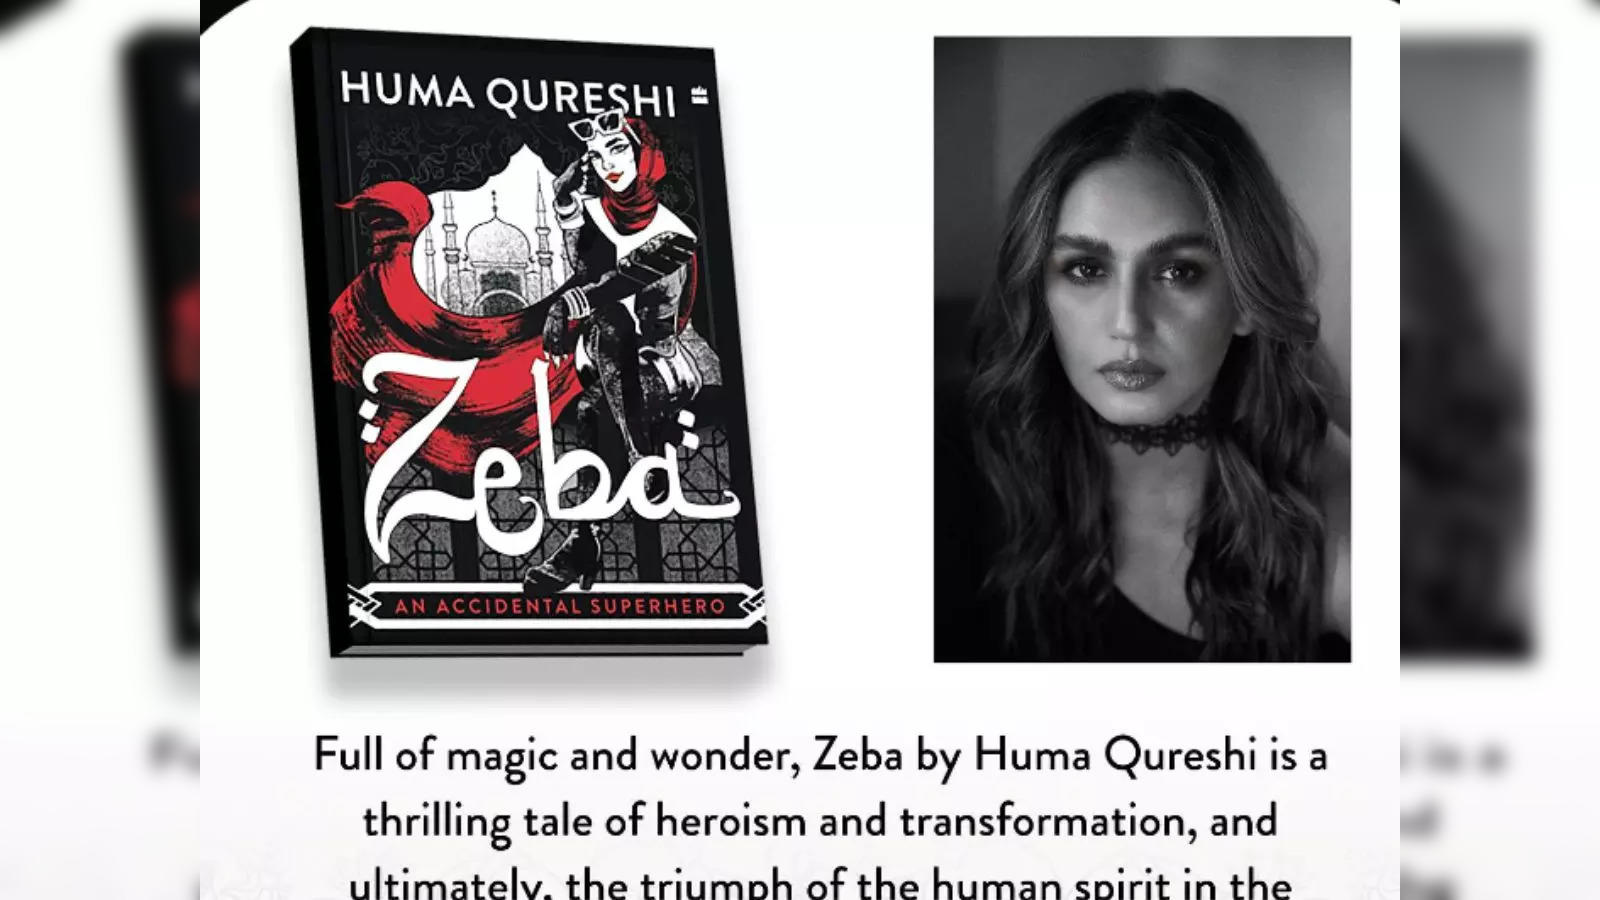 qureshi: Huma Qureshi makes her writing debut with the tale of an